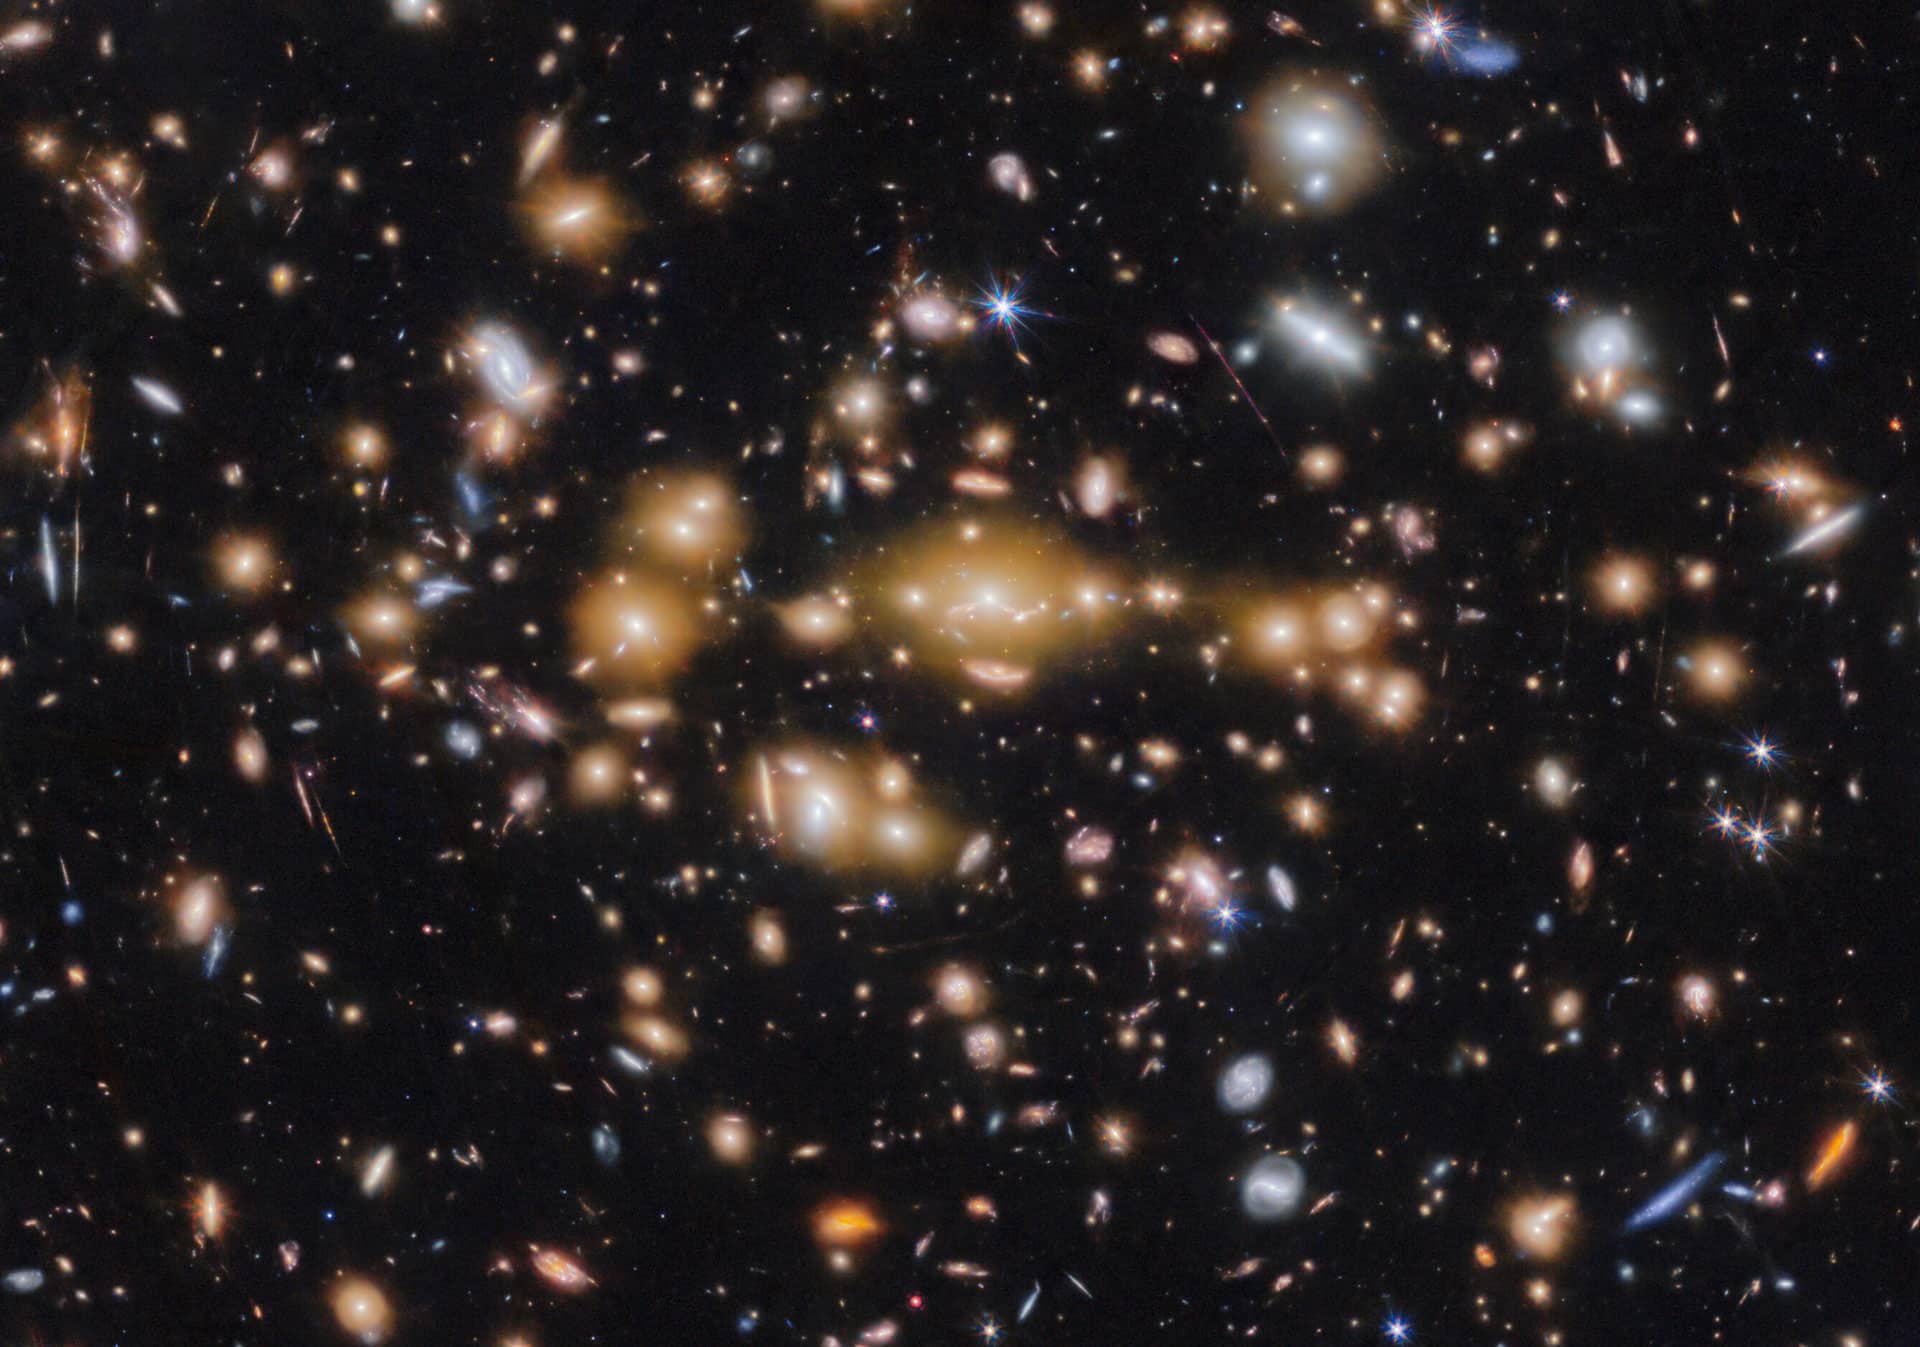 Galaxy cluster SPT-CL J0615−5746 (cropped)